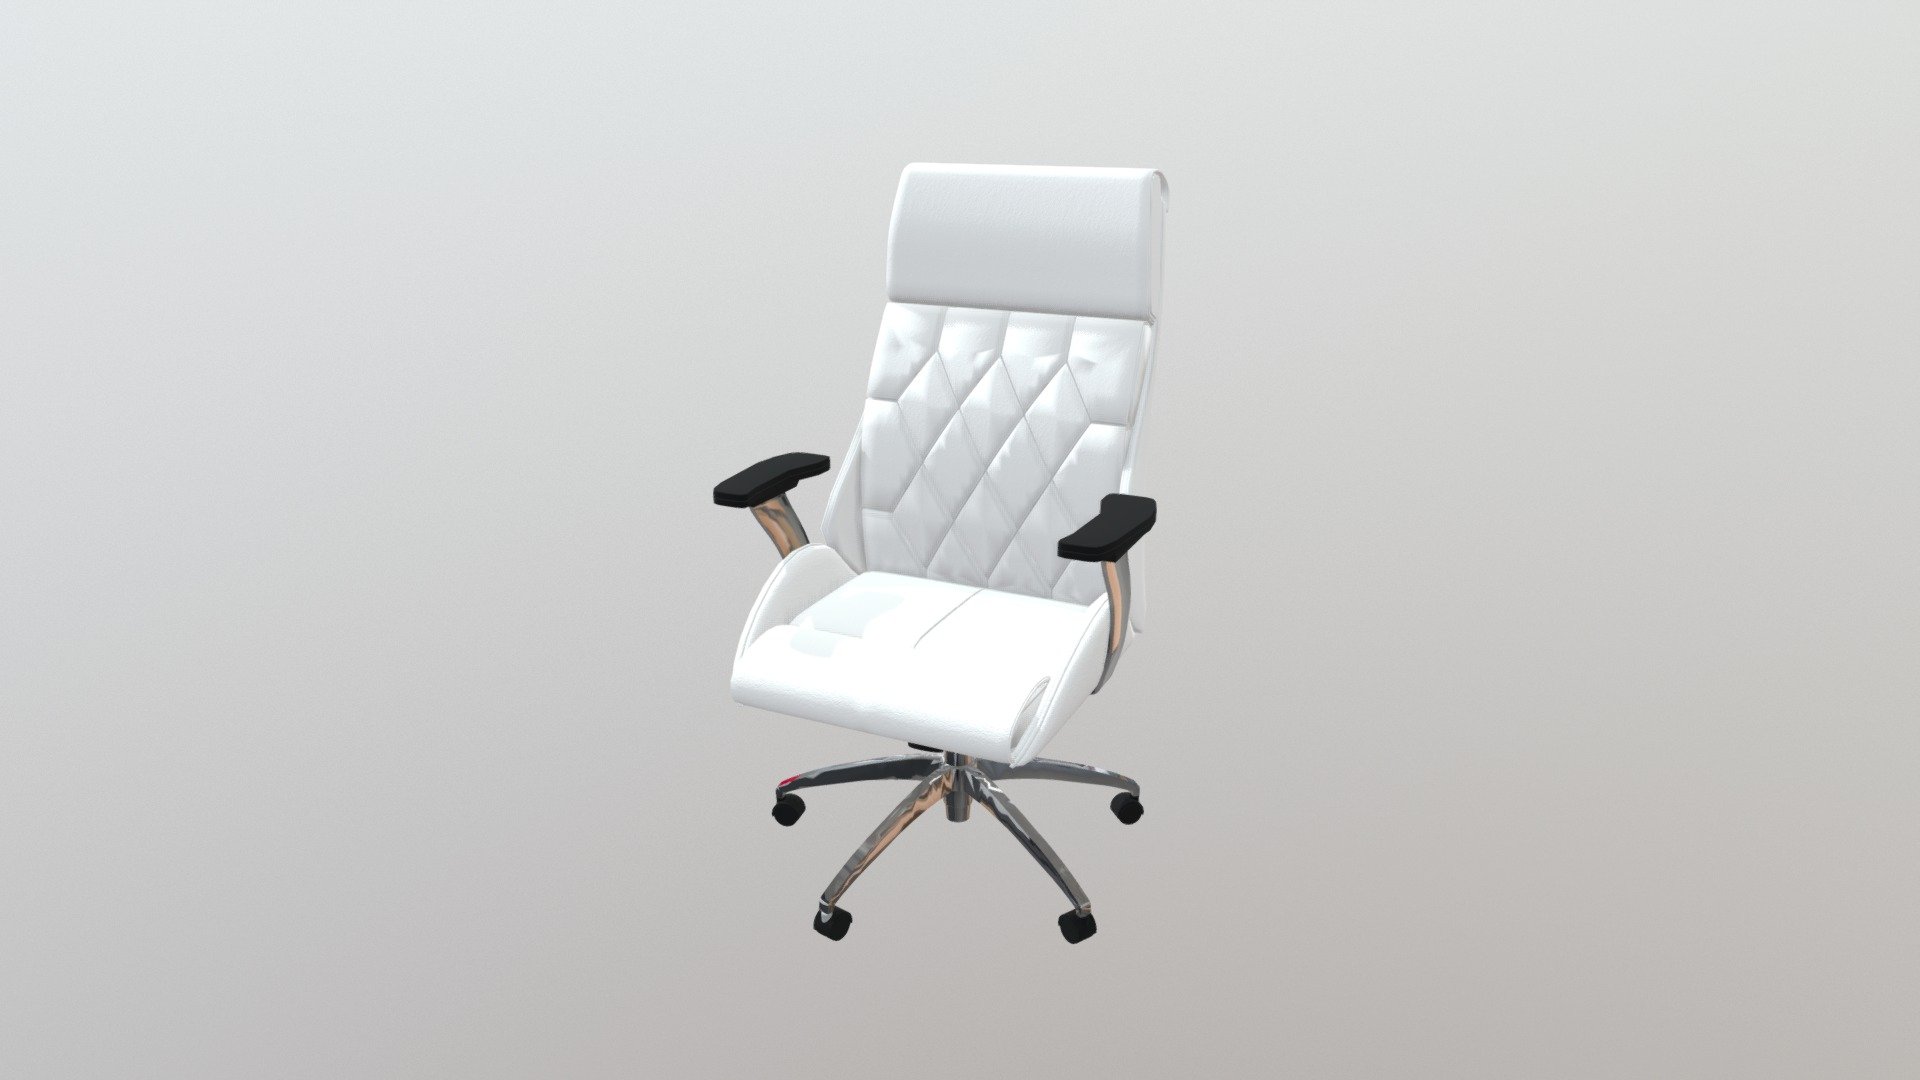 Be the leader of your desk with the Boutique Office Chair. Features leatherette wrapped seat and tufted back cushion with chrome frame. Adjustable height and tilt. www.zuomod.com/boutique-office-chair-white - Boutique Office Chair White - 205891 - Buy Royalty Free 3D model by Zuo Modern (@zuo) 3d model